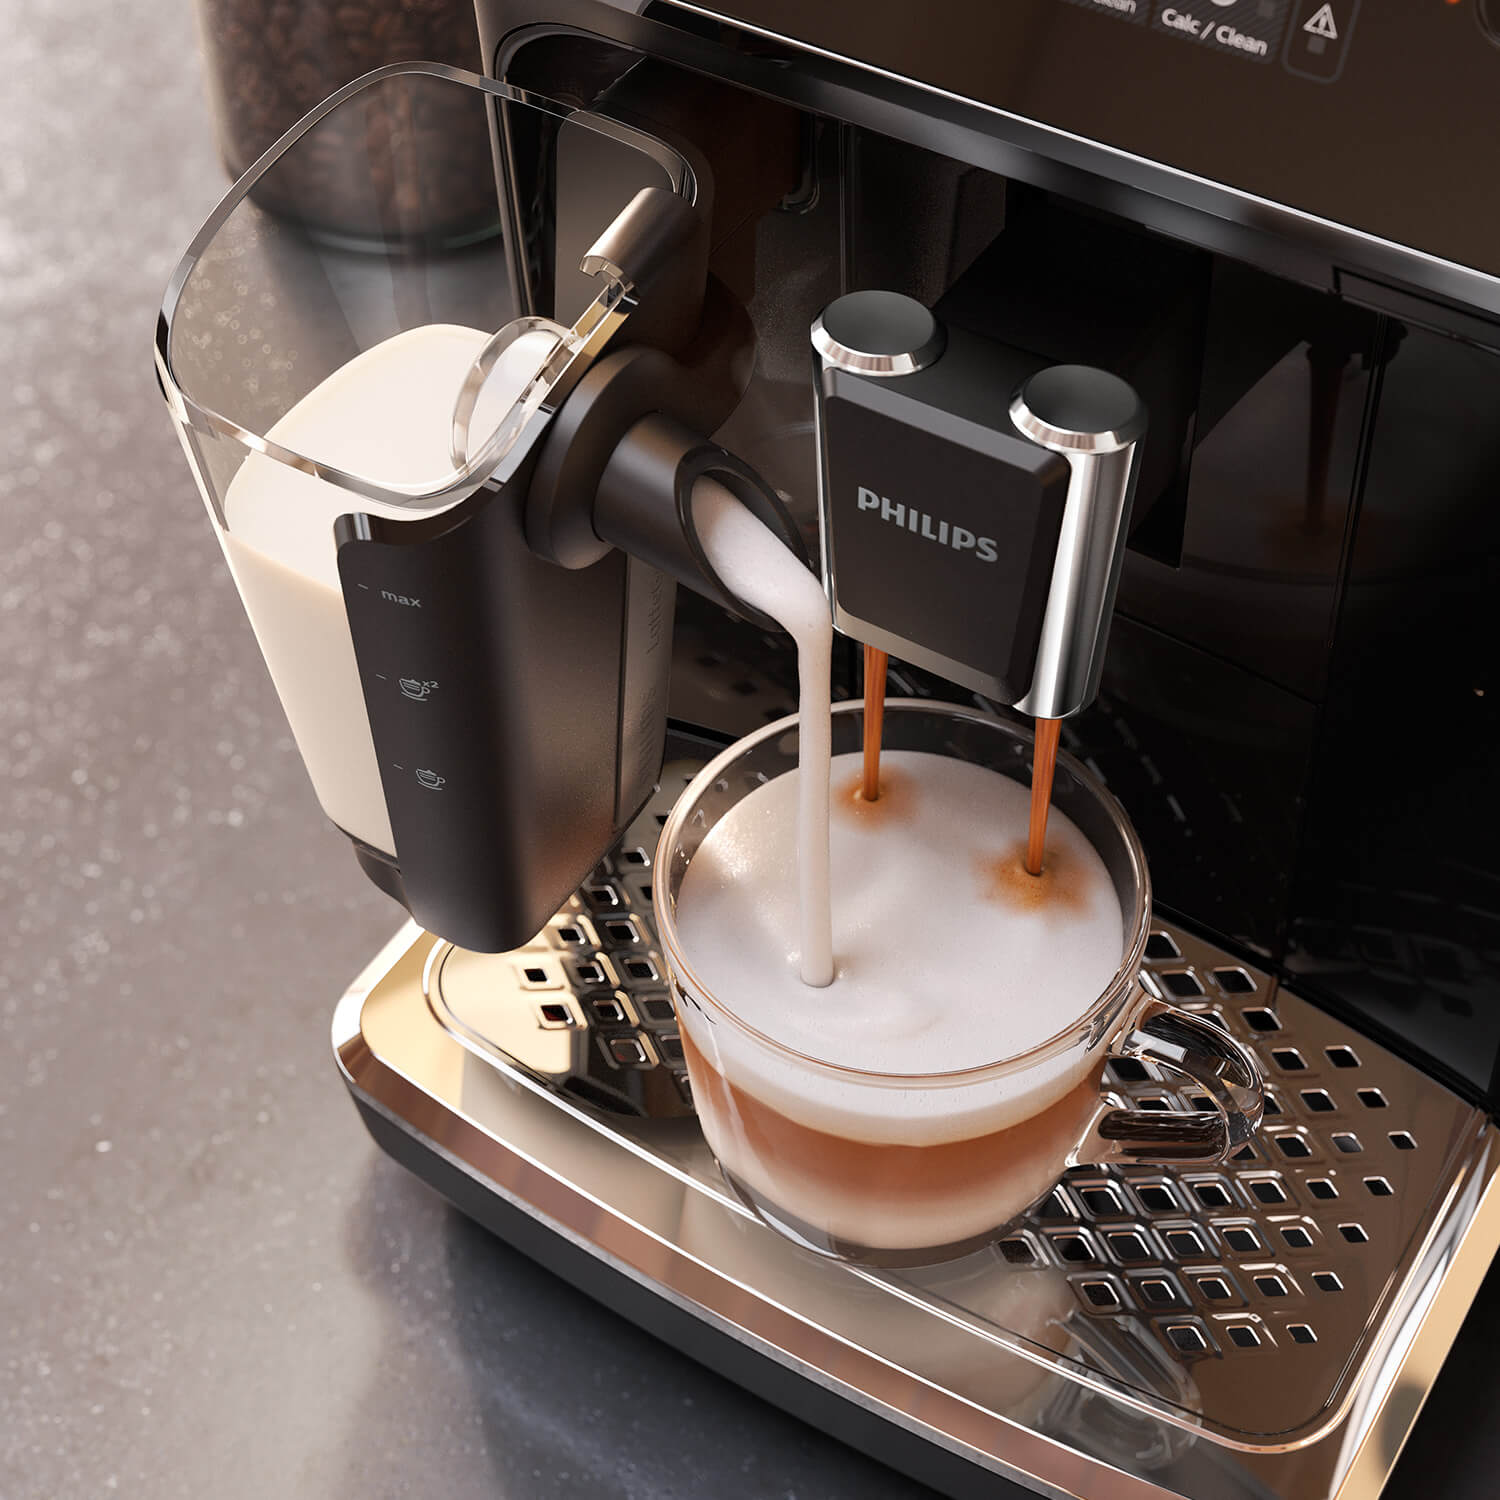 Philips 3200 Series Fully Automatic Espresso Machine - LatteGo with Ic –  Home Appliances Philips